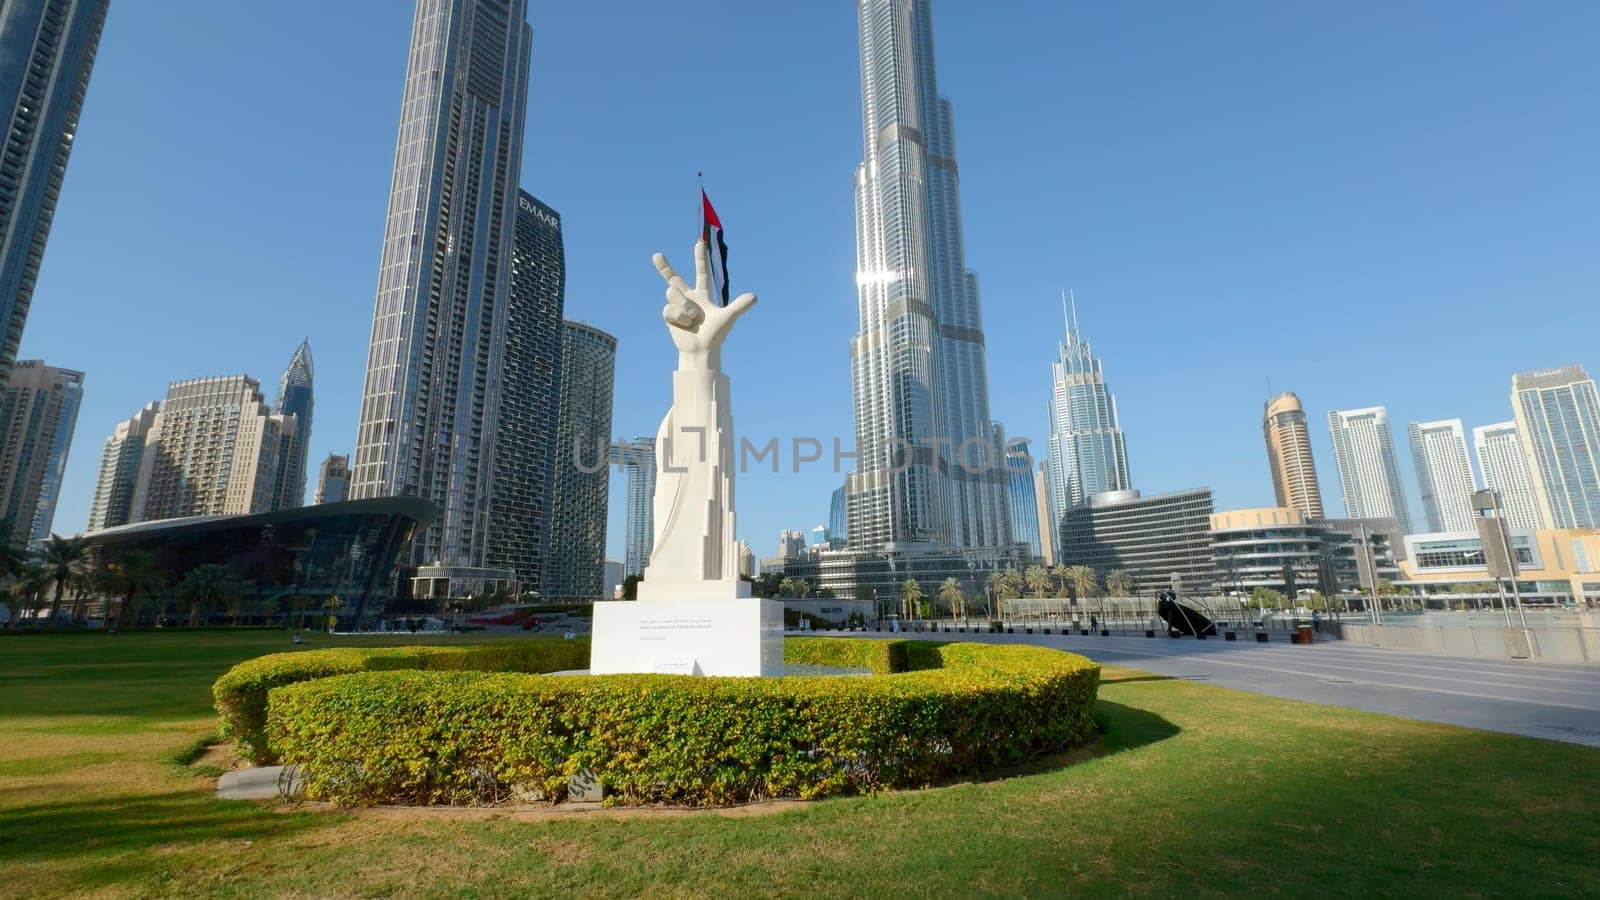 Camera moving towards sculpture with hand gesture: win, victory, love. Action. architecture and nature of sunny Dubai